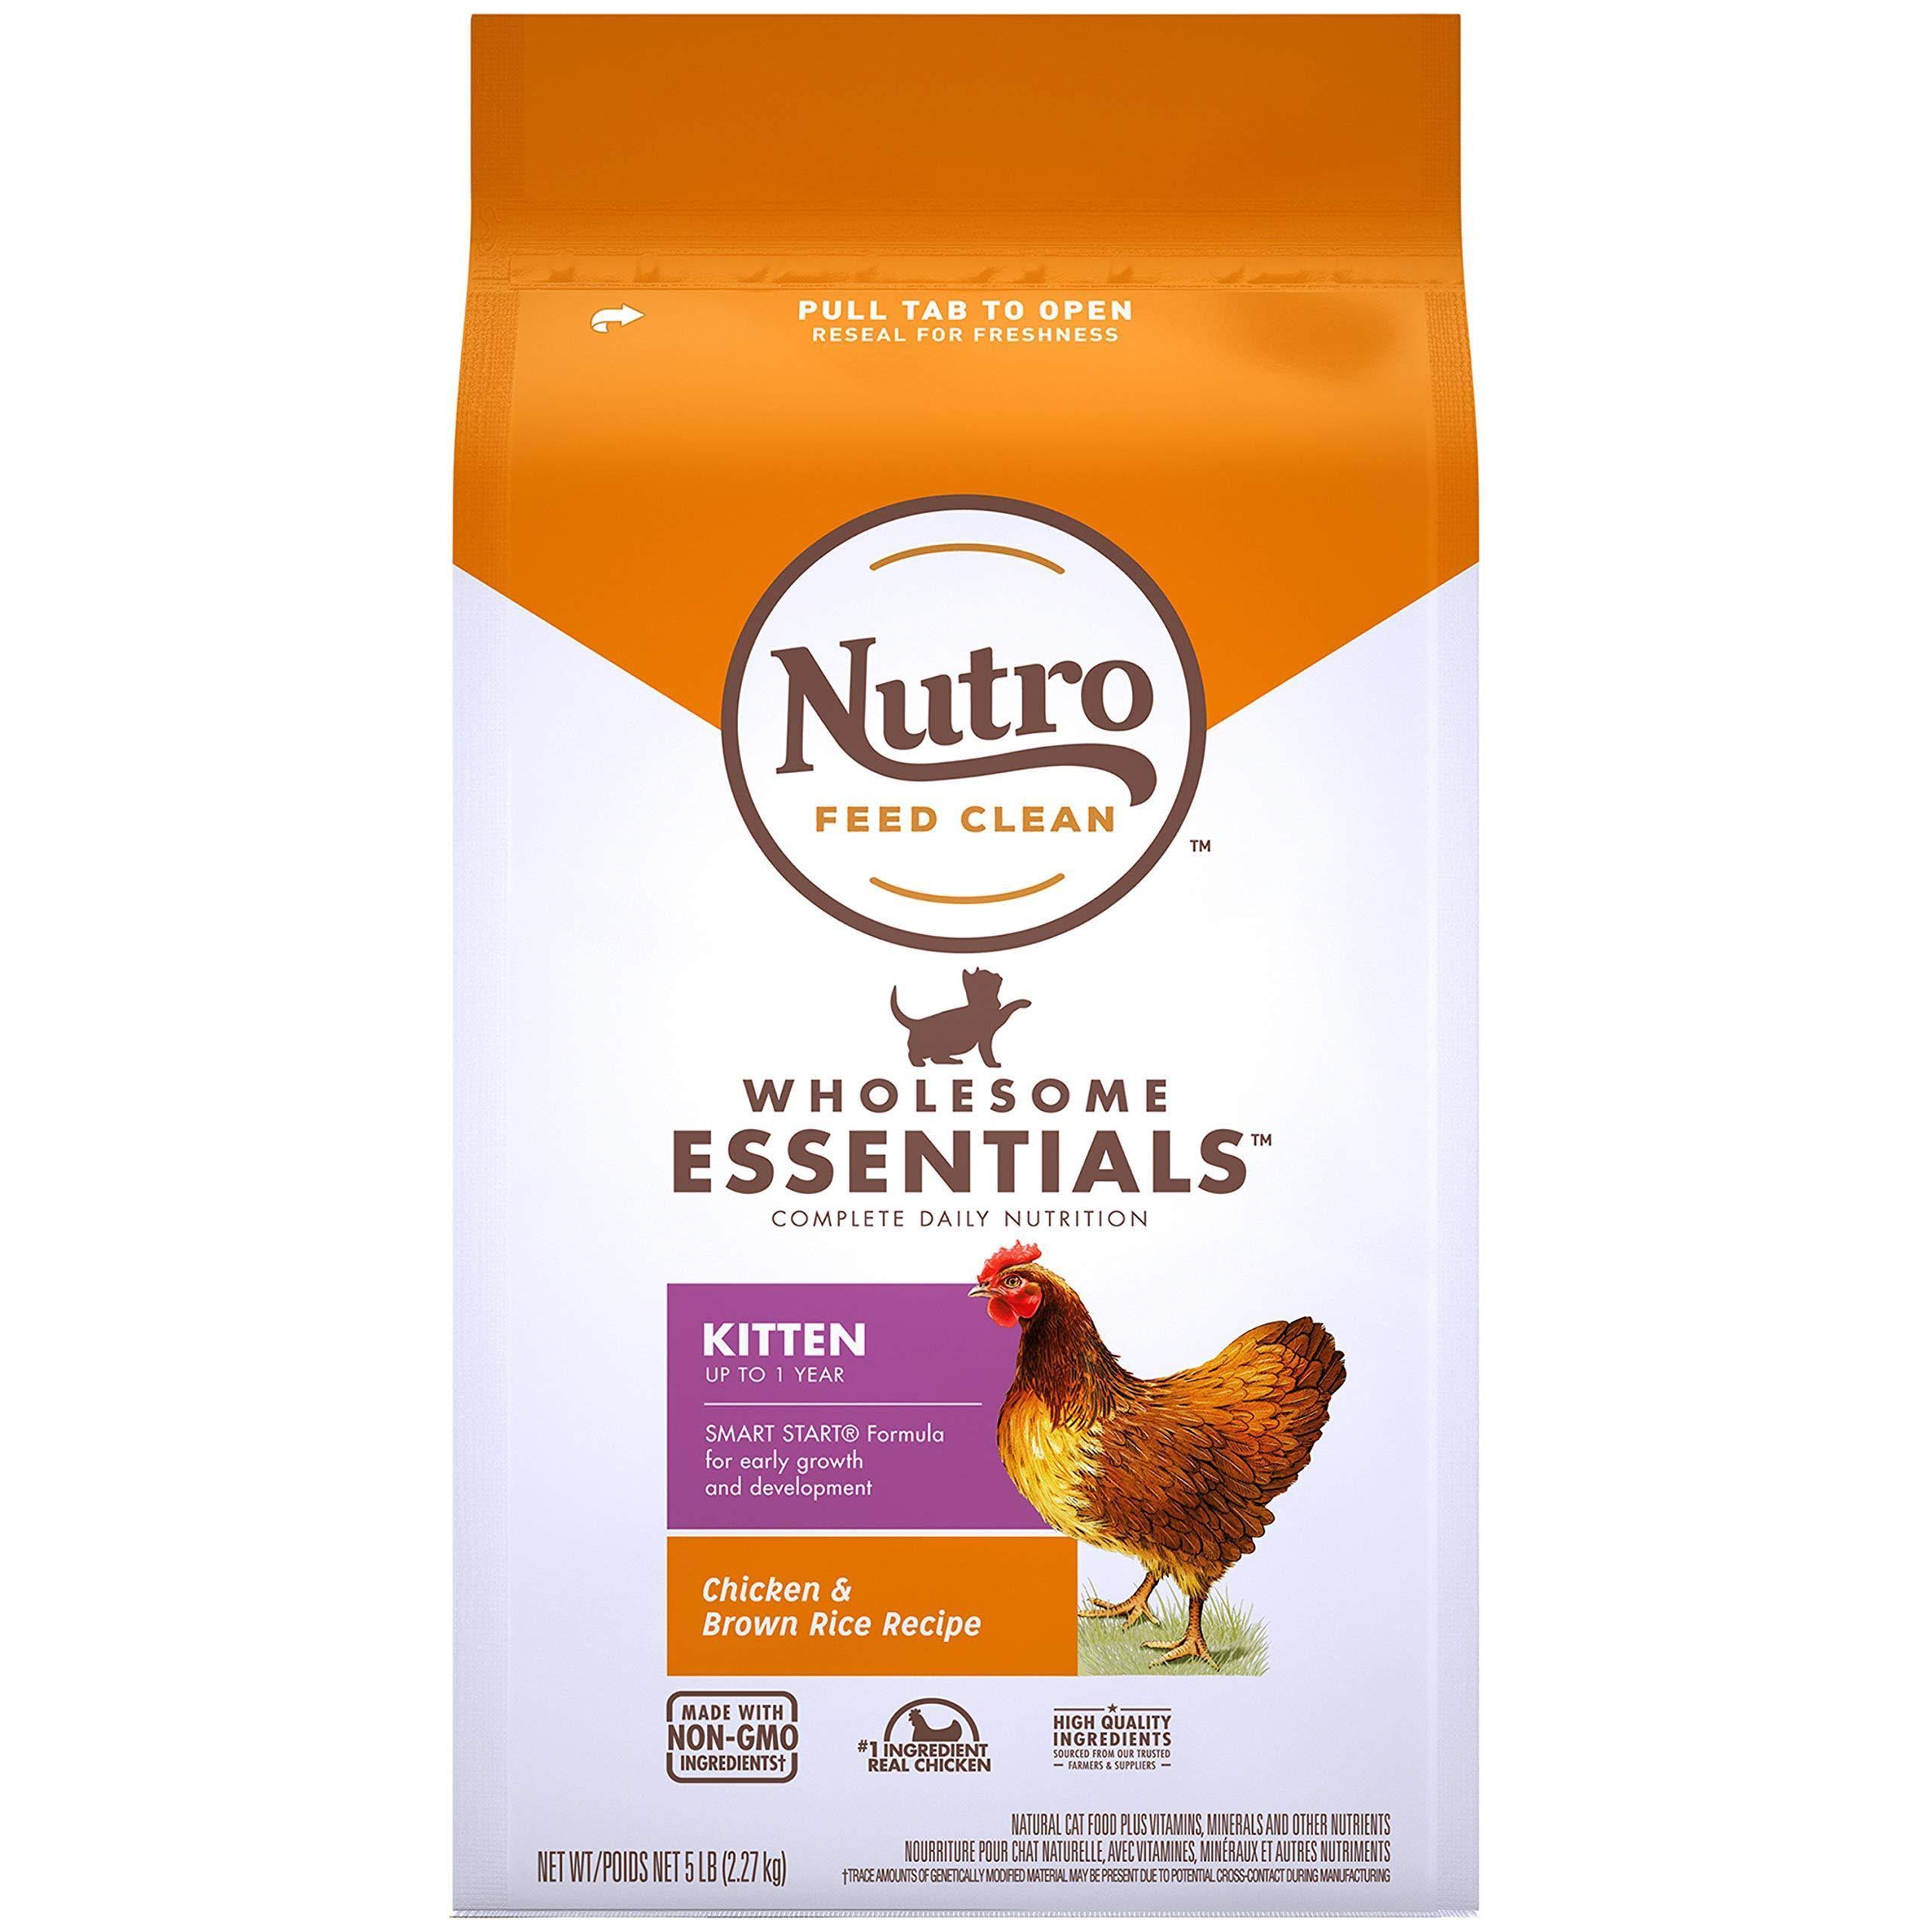 NUTRO WHOLESOME ESSENTIALS Natural Dry Cat Food, Kitten Chicken & Brown Rice Recipe Cat Kibble, 5 Lb Bag